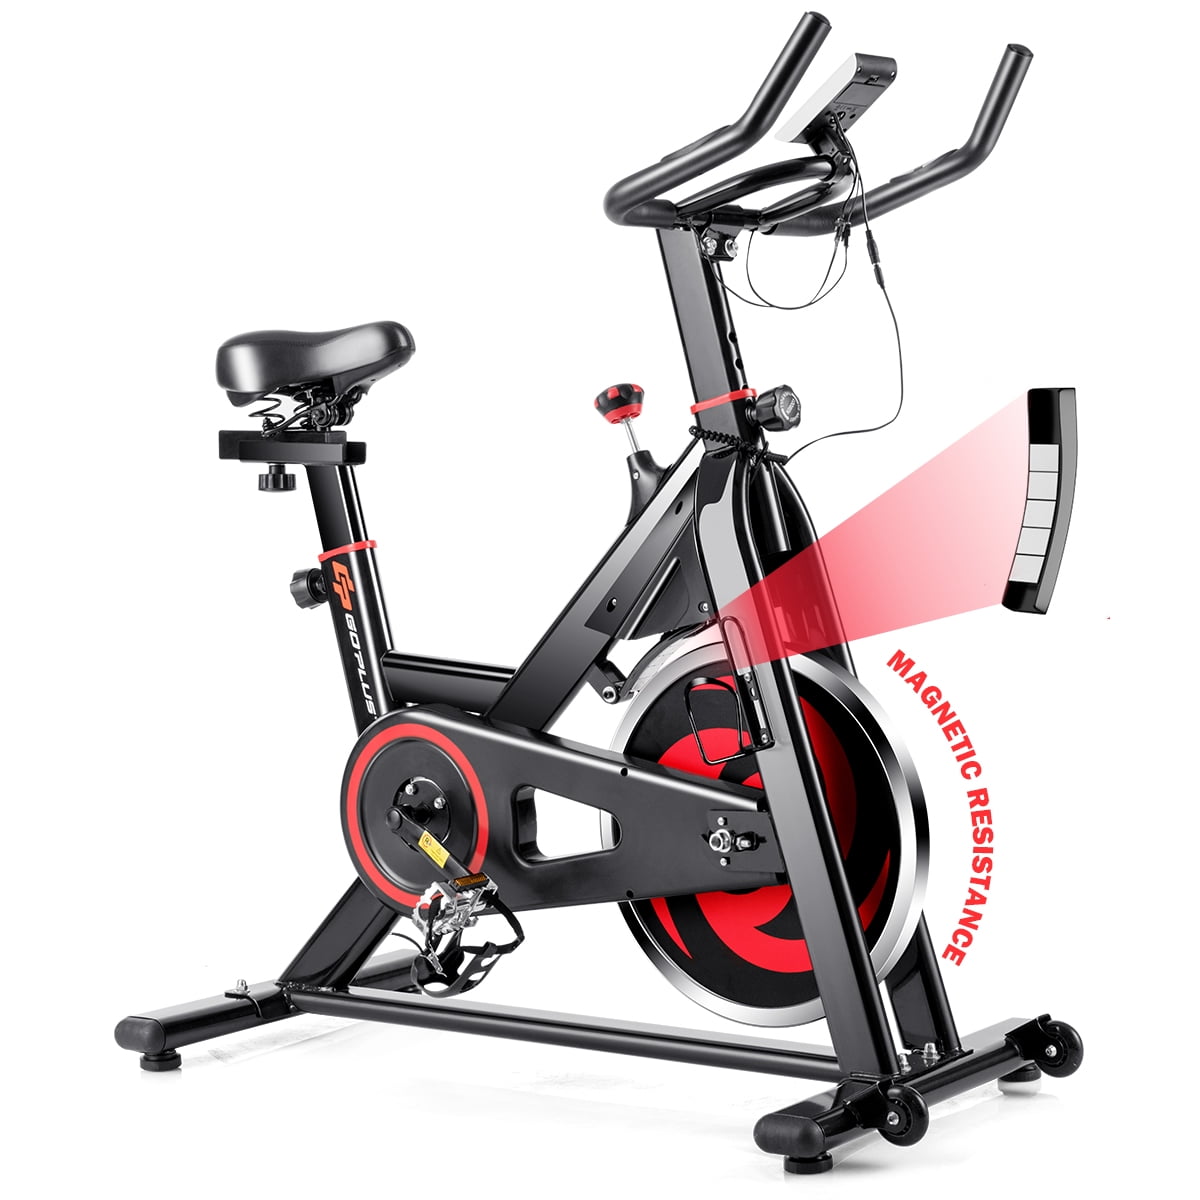 Exercise Bike with APP Belt Drive Adjustable Resistance Comfortable Seat Cushion HEKA Exercise Bike Indoor Cycling Bike Stationary for Home Cardio Workout Bike Training 